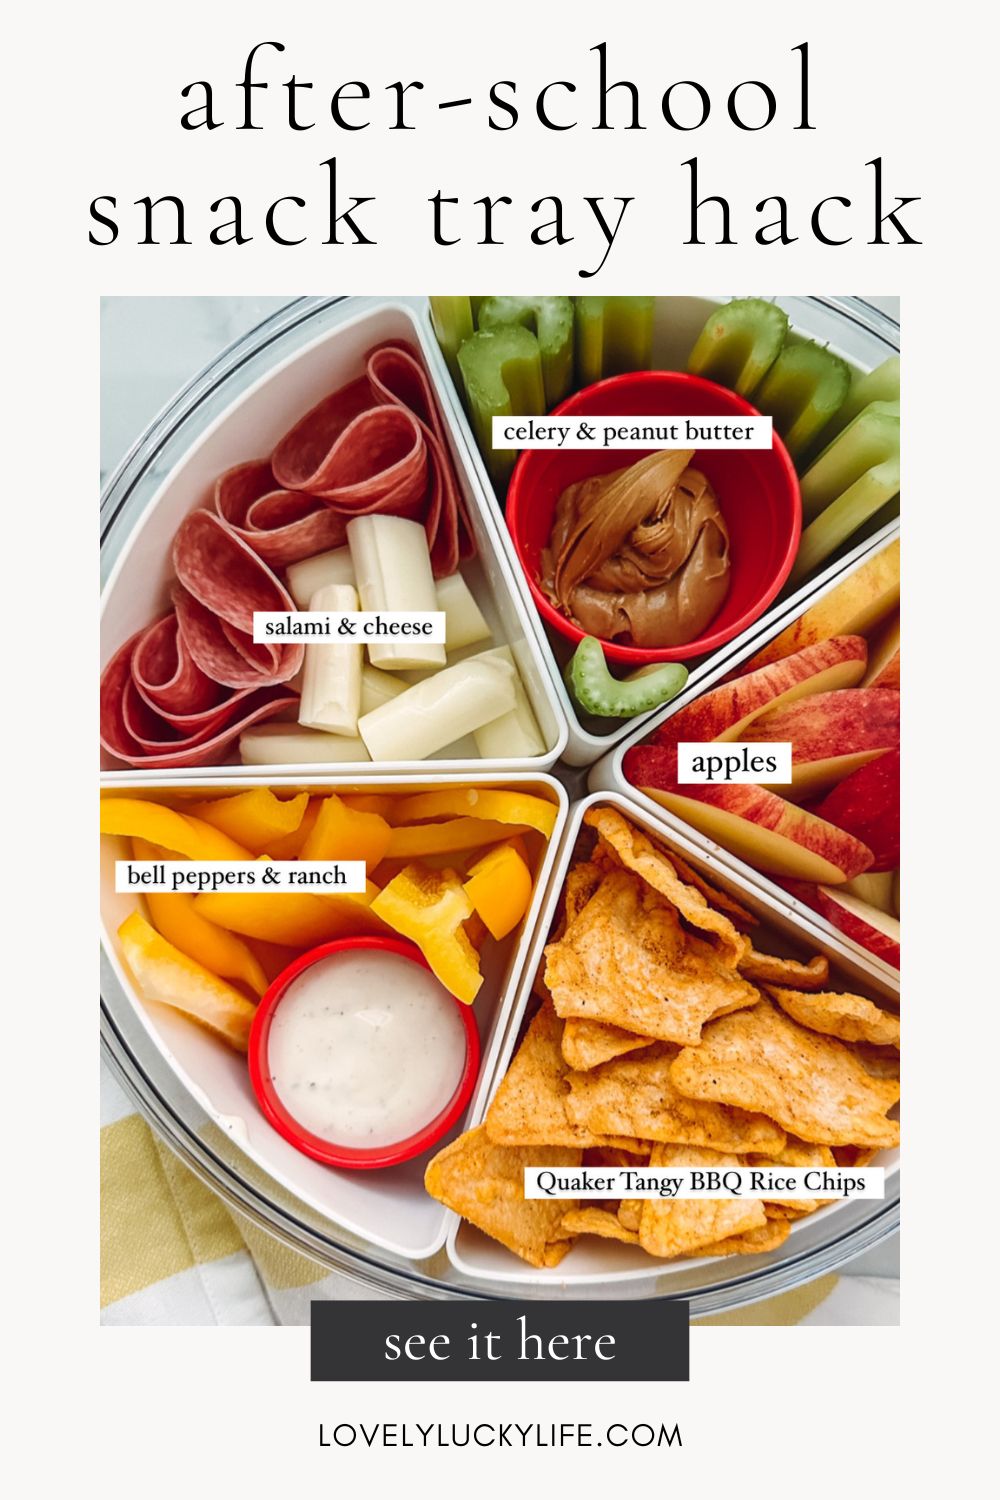 After-School Snack Tray Hack from LovelyLuckyLife